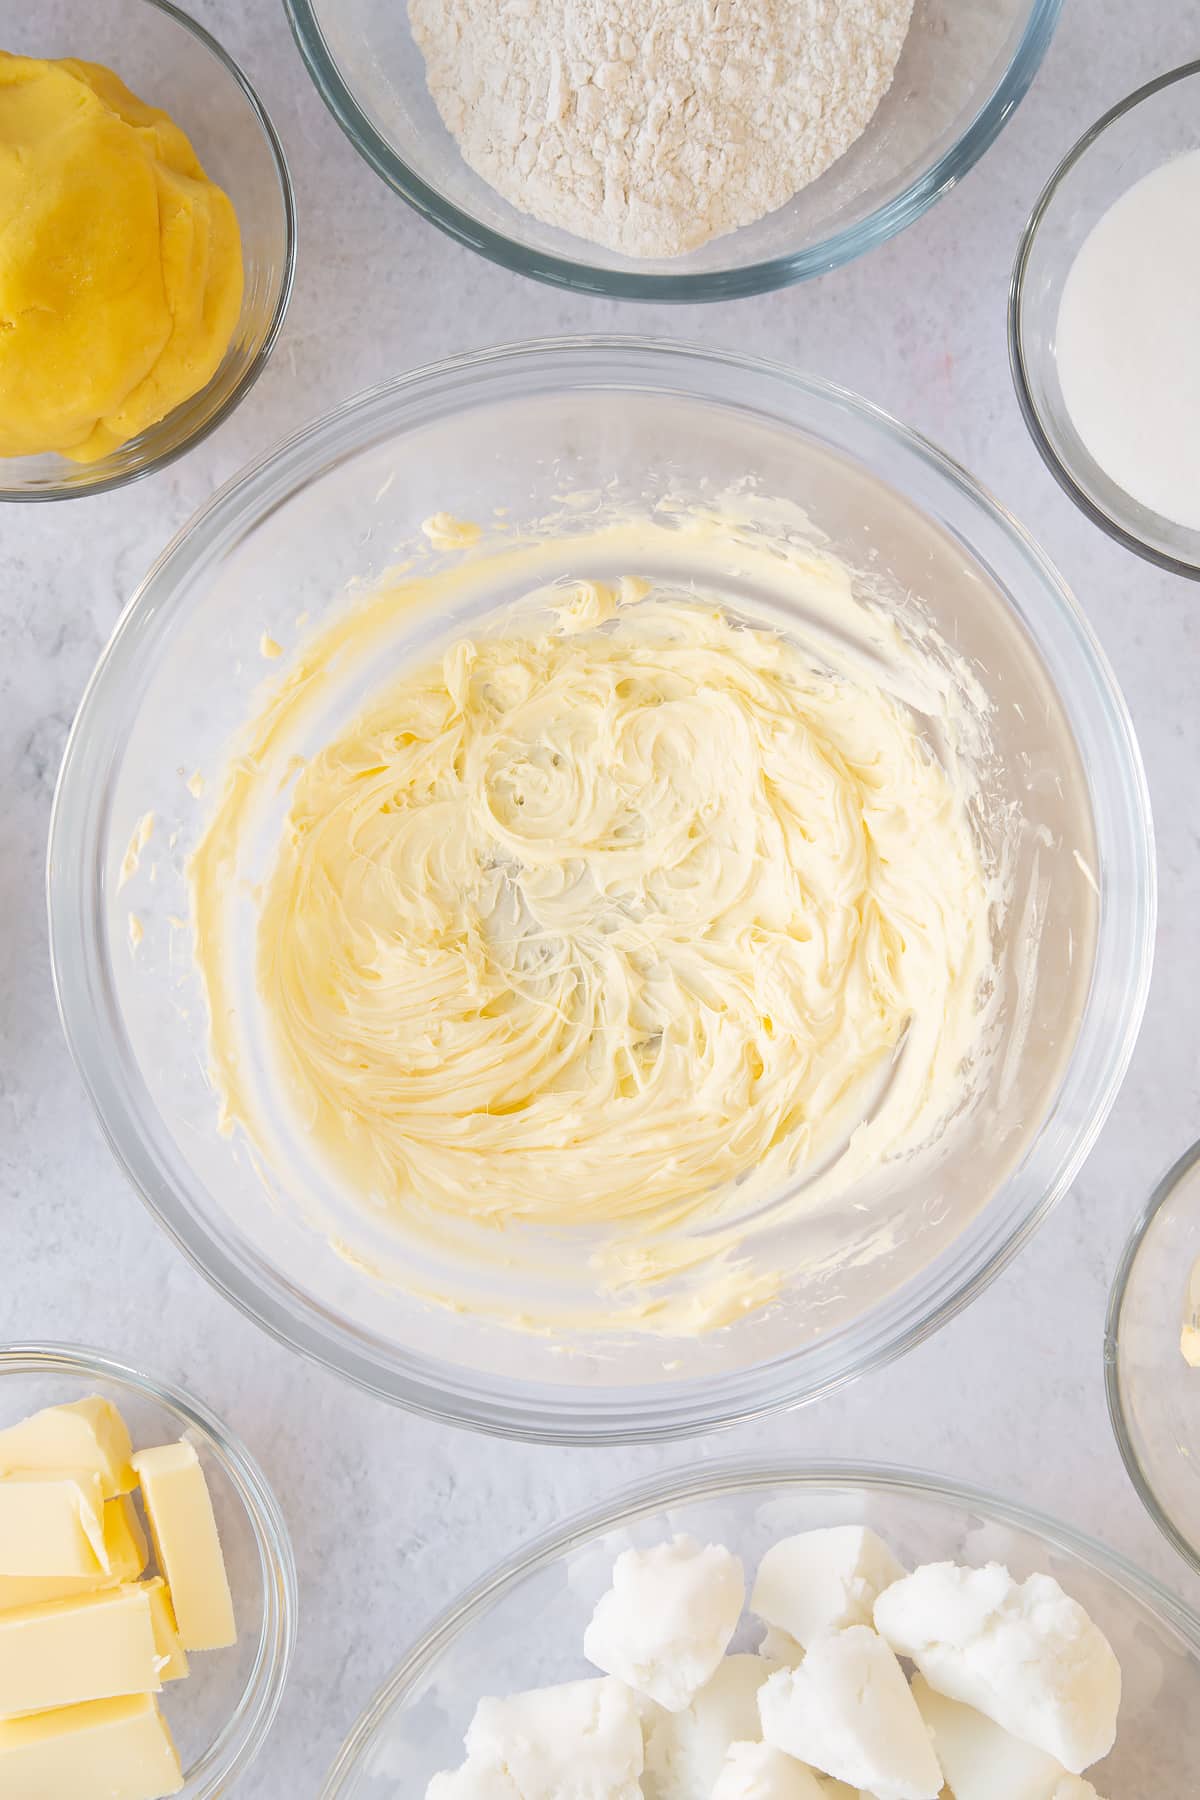 Whisking the butter until creamy and pale.